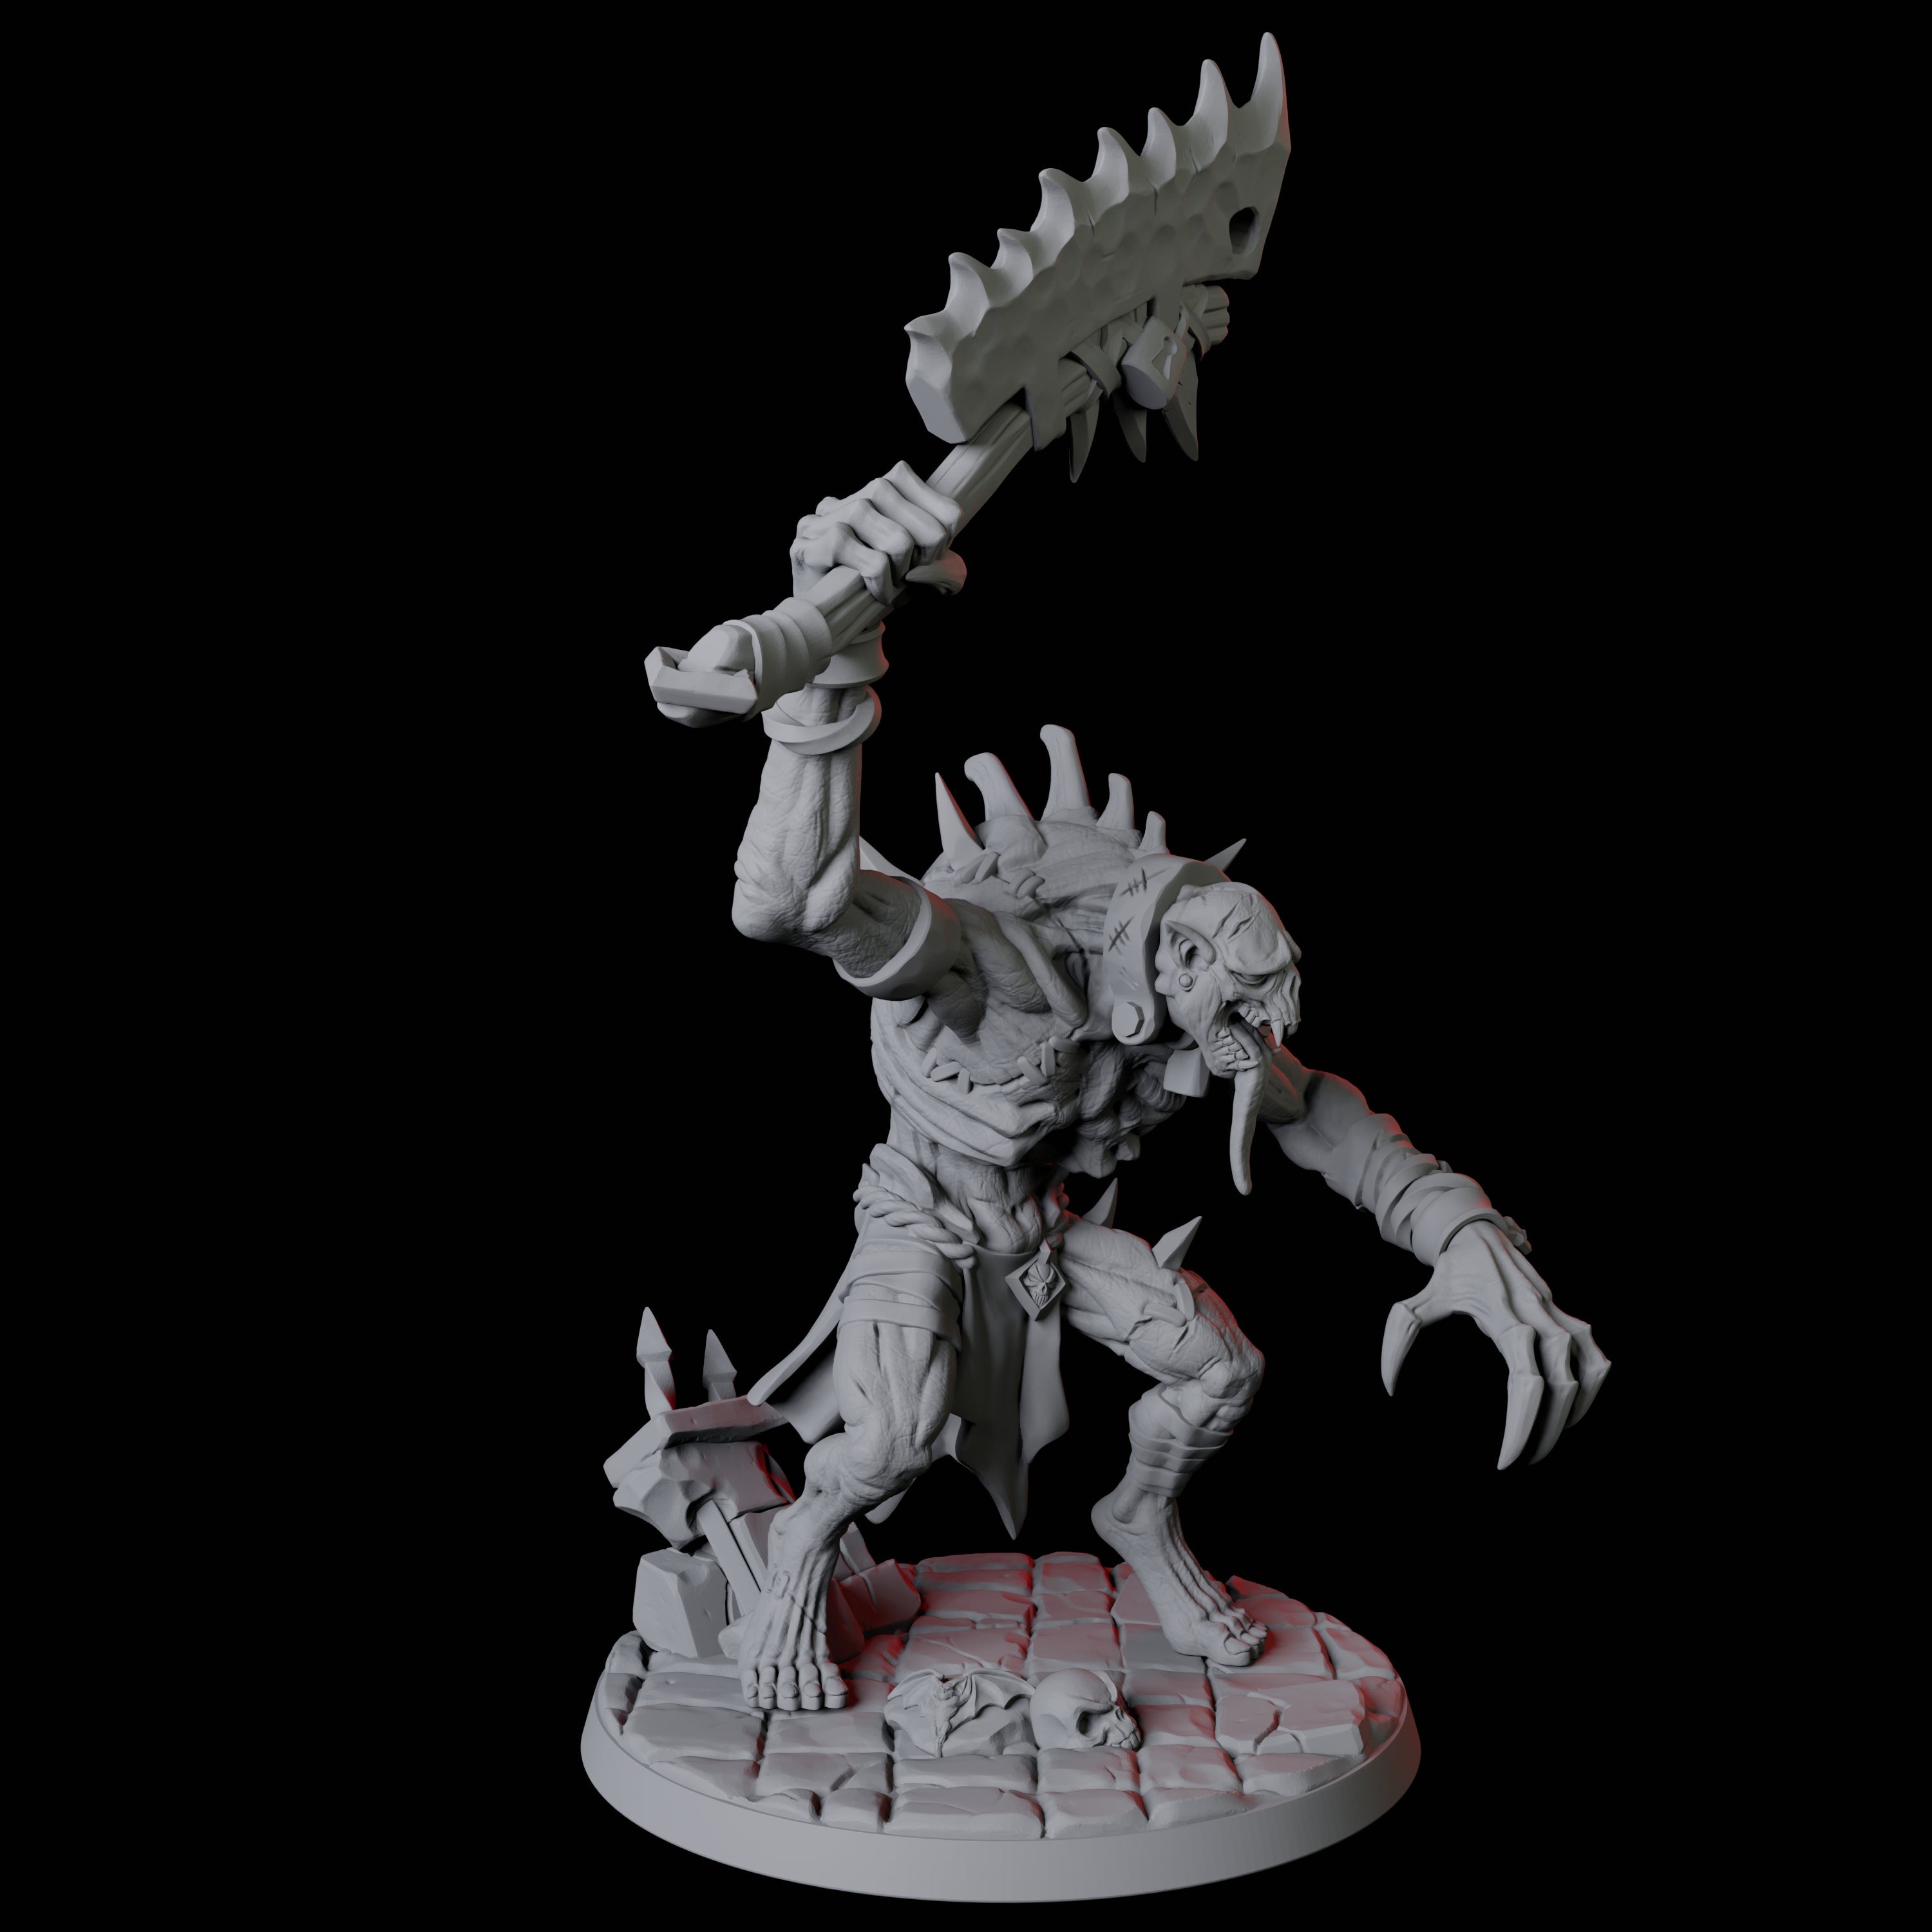 Roaming Ghast C Miniature for Dungeons and Dragons, Pathfinder or other TTRPGs